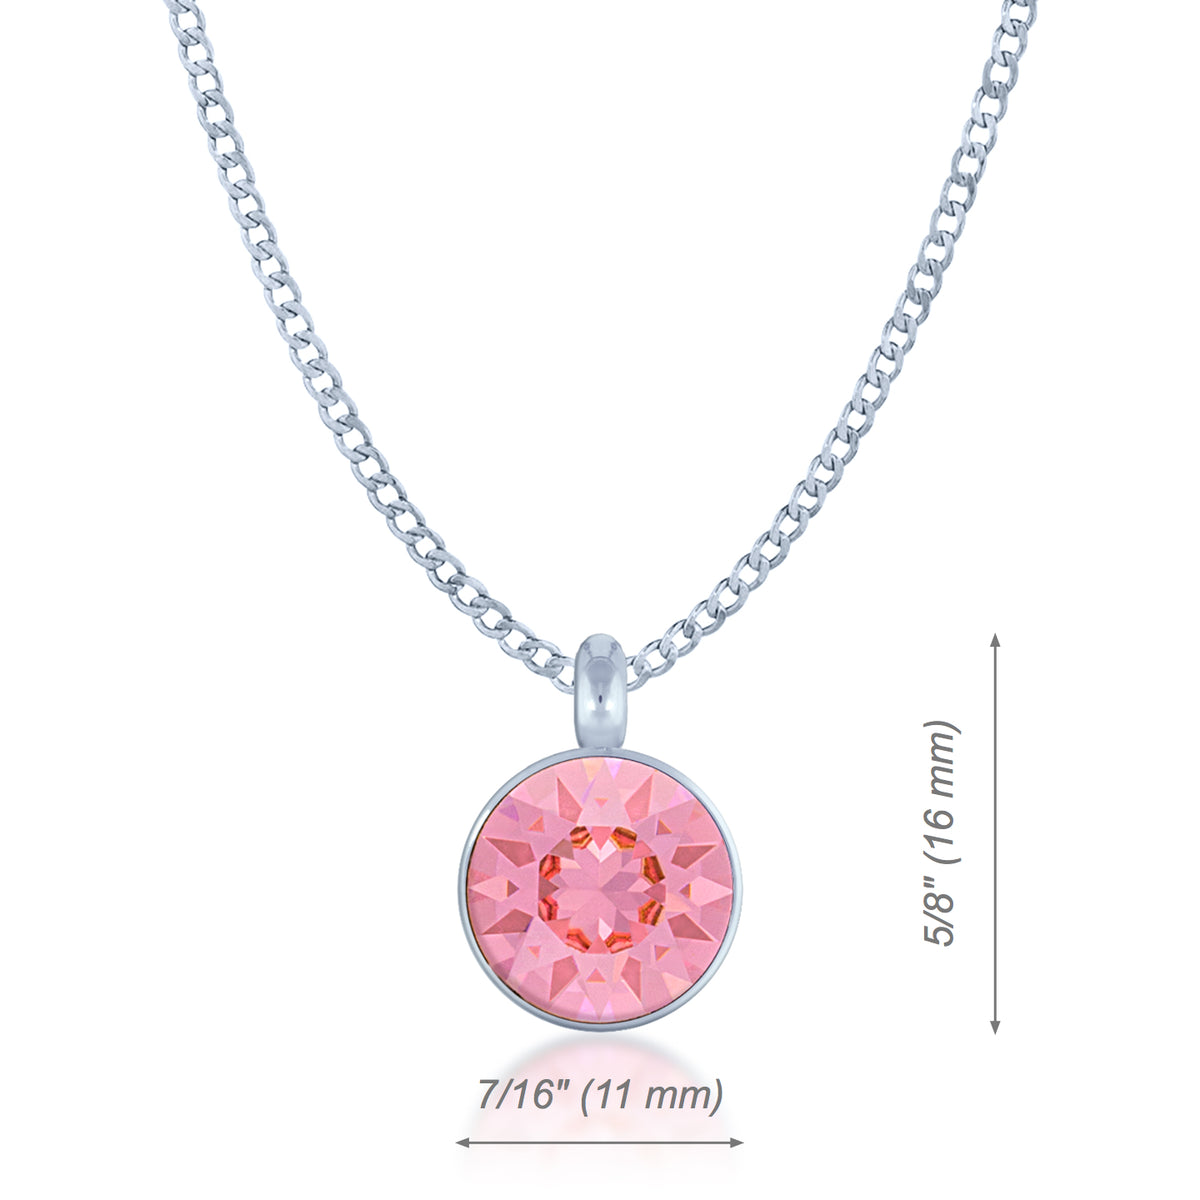 Bella Pendant Necklace with Pink Light Rose Round Crystals from Swarovski Silver Toned Rhodium Plated - Ed Heart